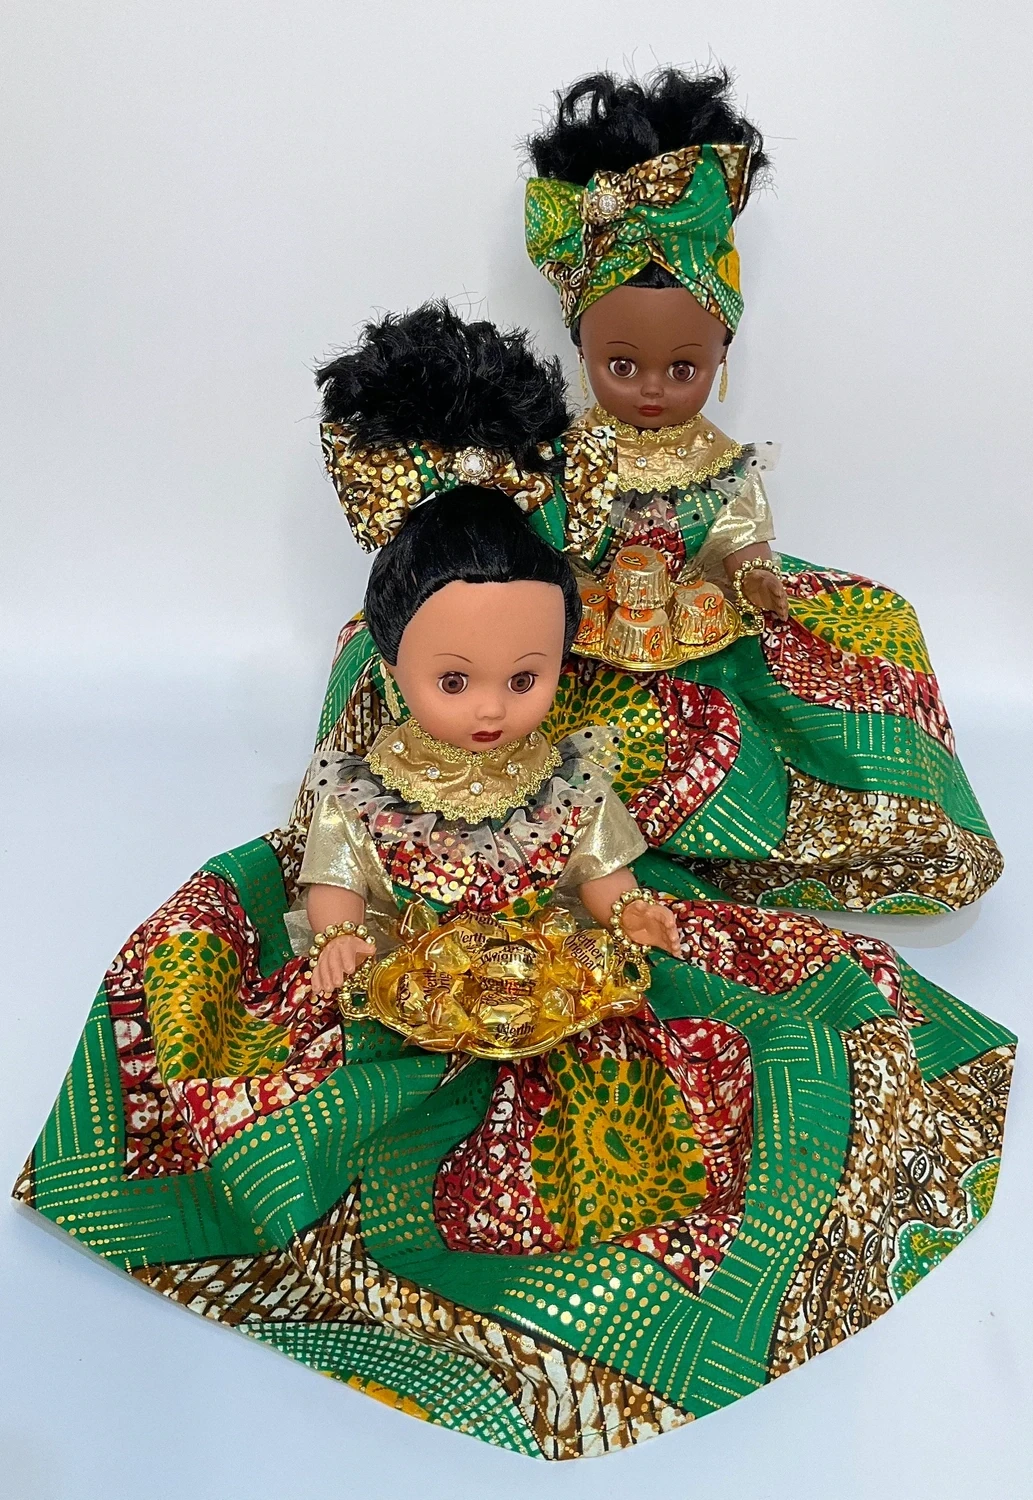 African Princess Sitting Doll, Doll Figurine Holding Candy Tray, Black Doll, Holiday Table Decorations, African Princess Sitting Dolls: Green Light Skin Tone